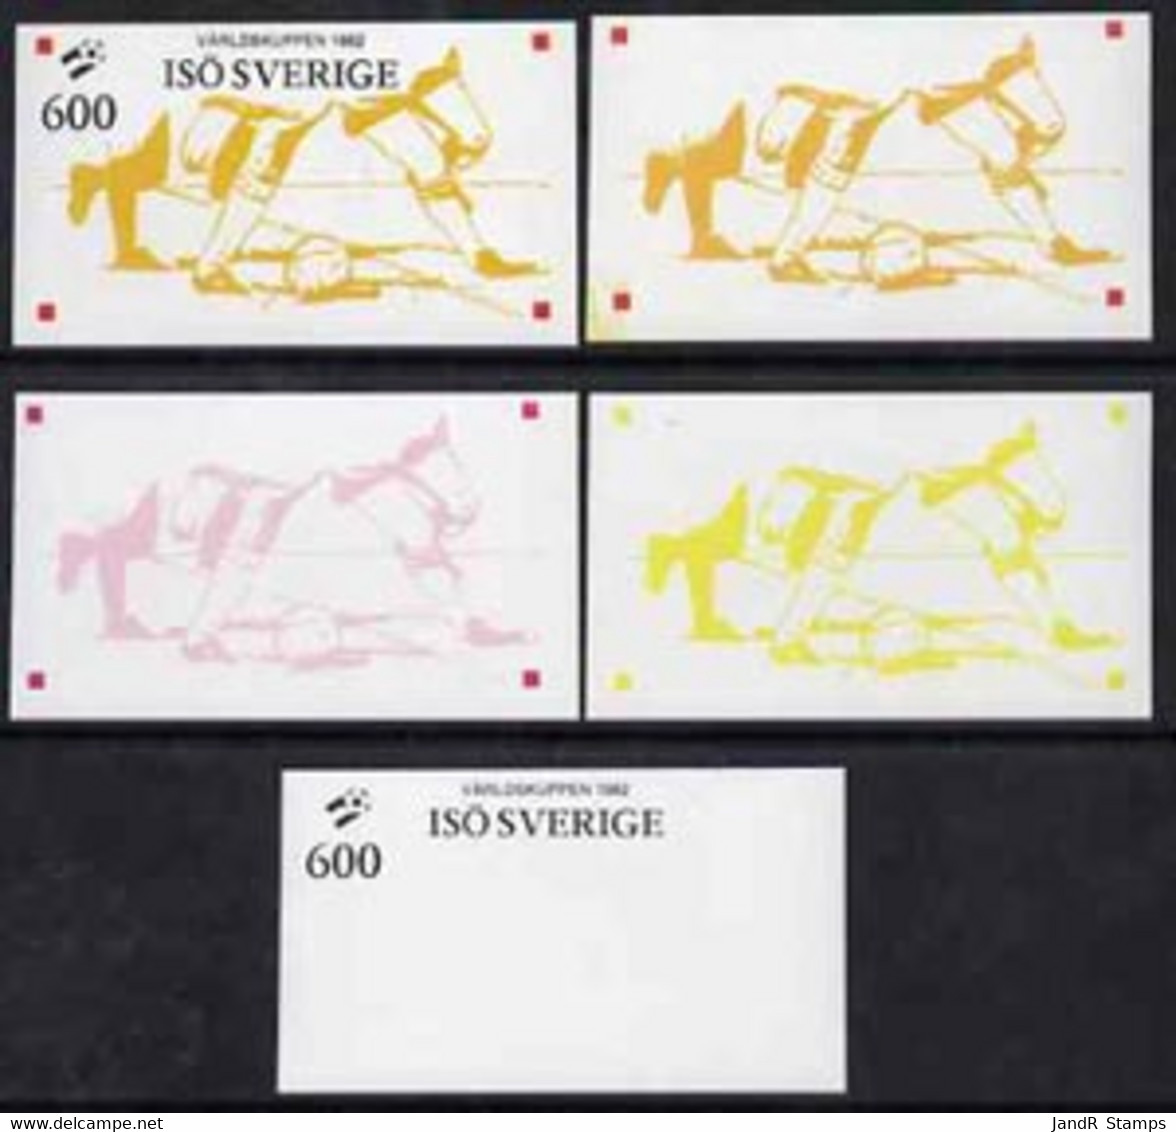 Iso - Sweden 1982 Football World Cup Imperf Souvenir Sheet (600 Value) Set Of 5 Progressive Colour Proofs Comprising The - Lokale Uitgaven